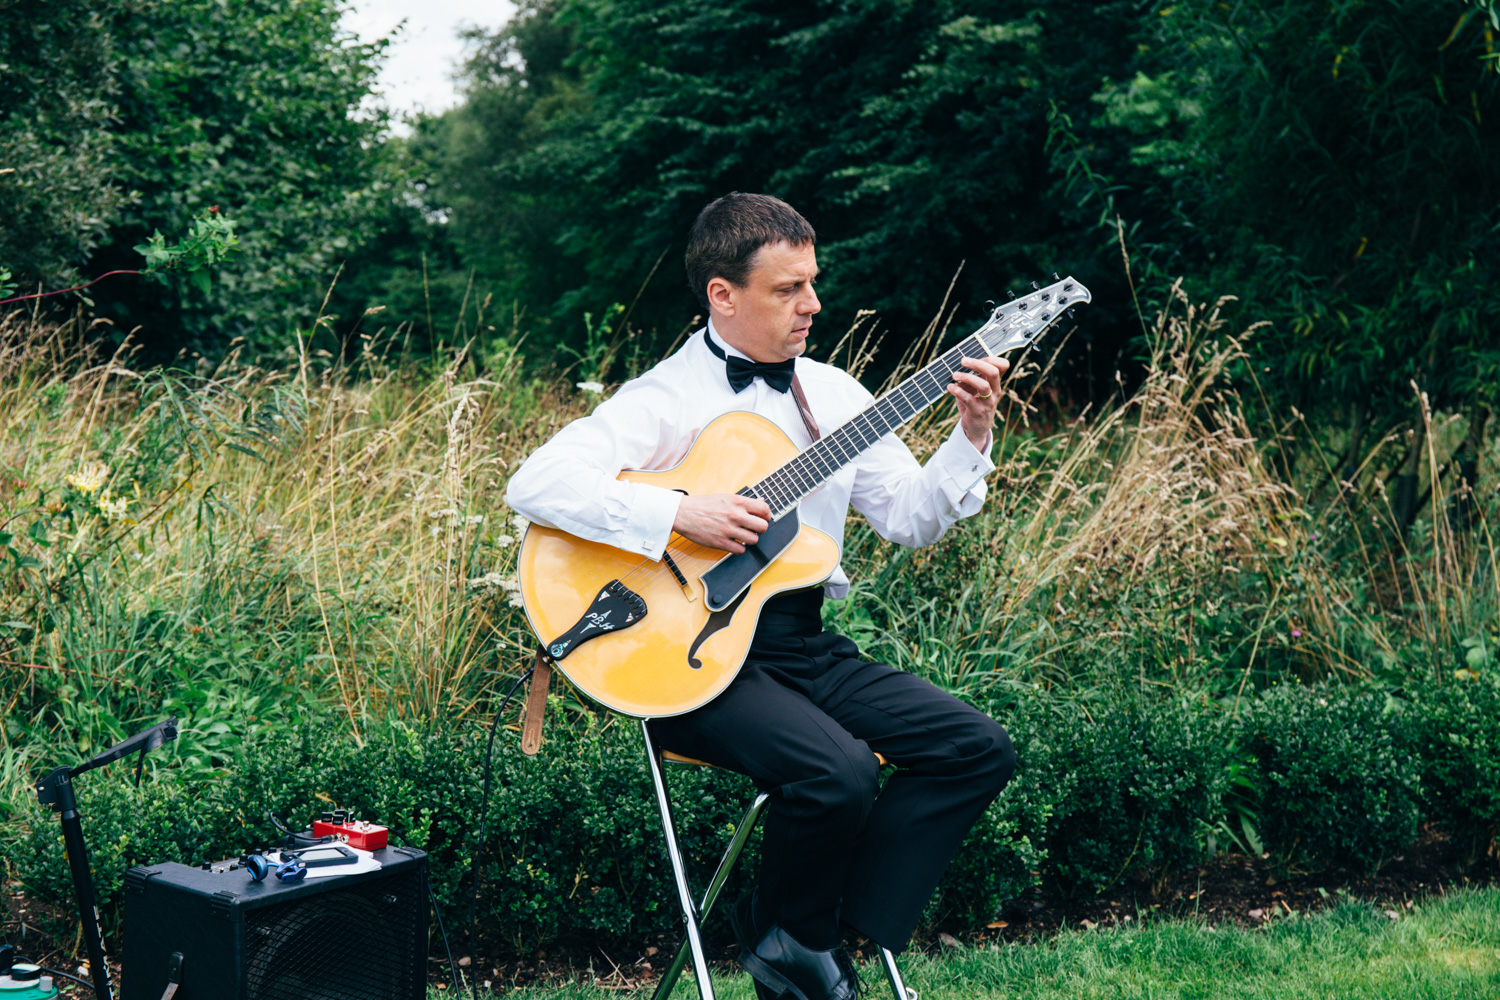 guitar player at outdoor ceremony